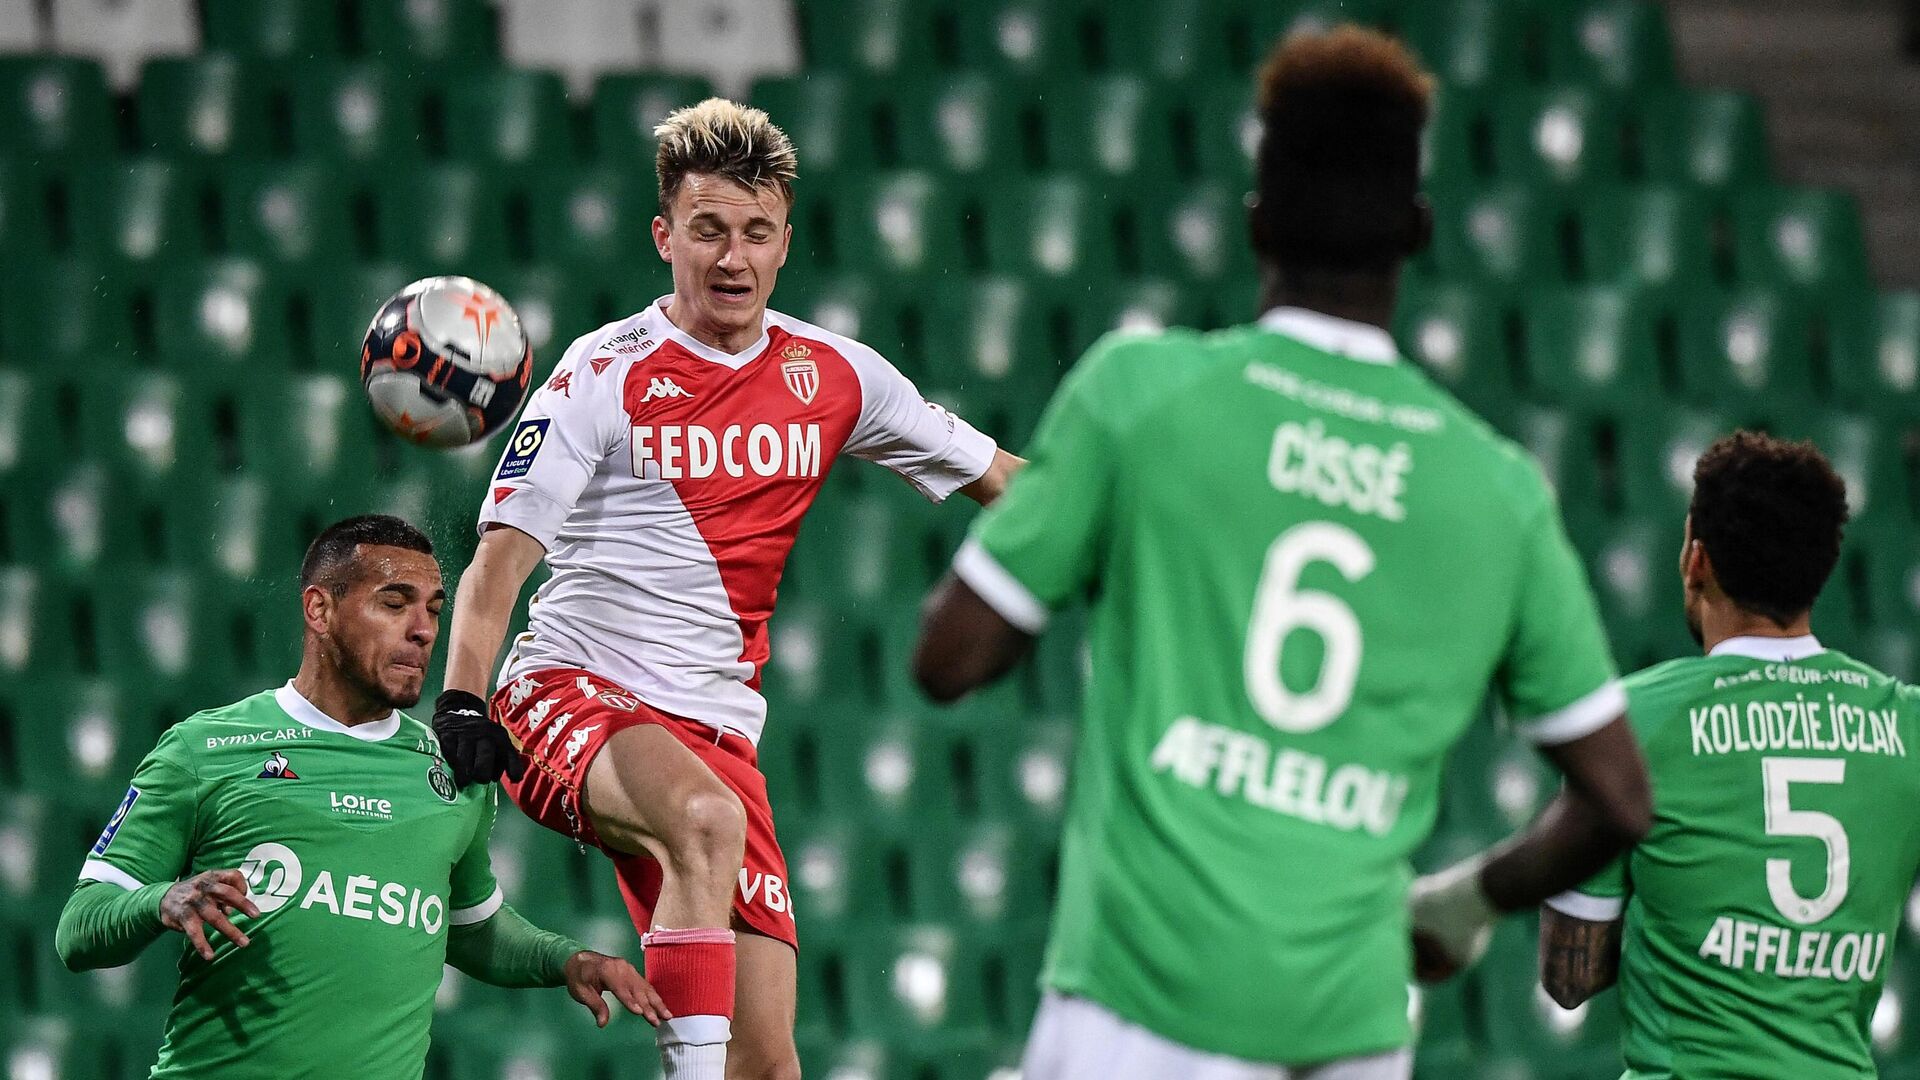 Saint-Etienne's Peruvian defender Miguel Trauco (L) fights for the ball with Monaco's Russian midfielder Aleksandr Golovin (R) during the French L1 football match, AS Saint-Etienne (ASSE) vs AS Moncao (ASM) on March 19, 2021 at Geoffroy Guichard stadium in Saint-Etienne. (Photo by JEFF PACHOUD / AFP) - РИА Новости, 1920, 20.03.2021